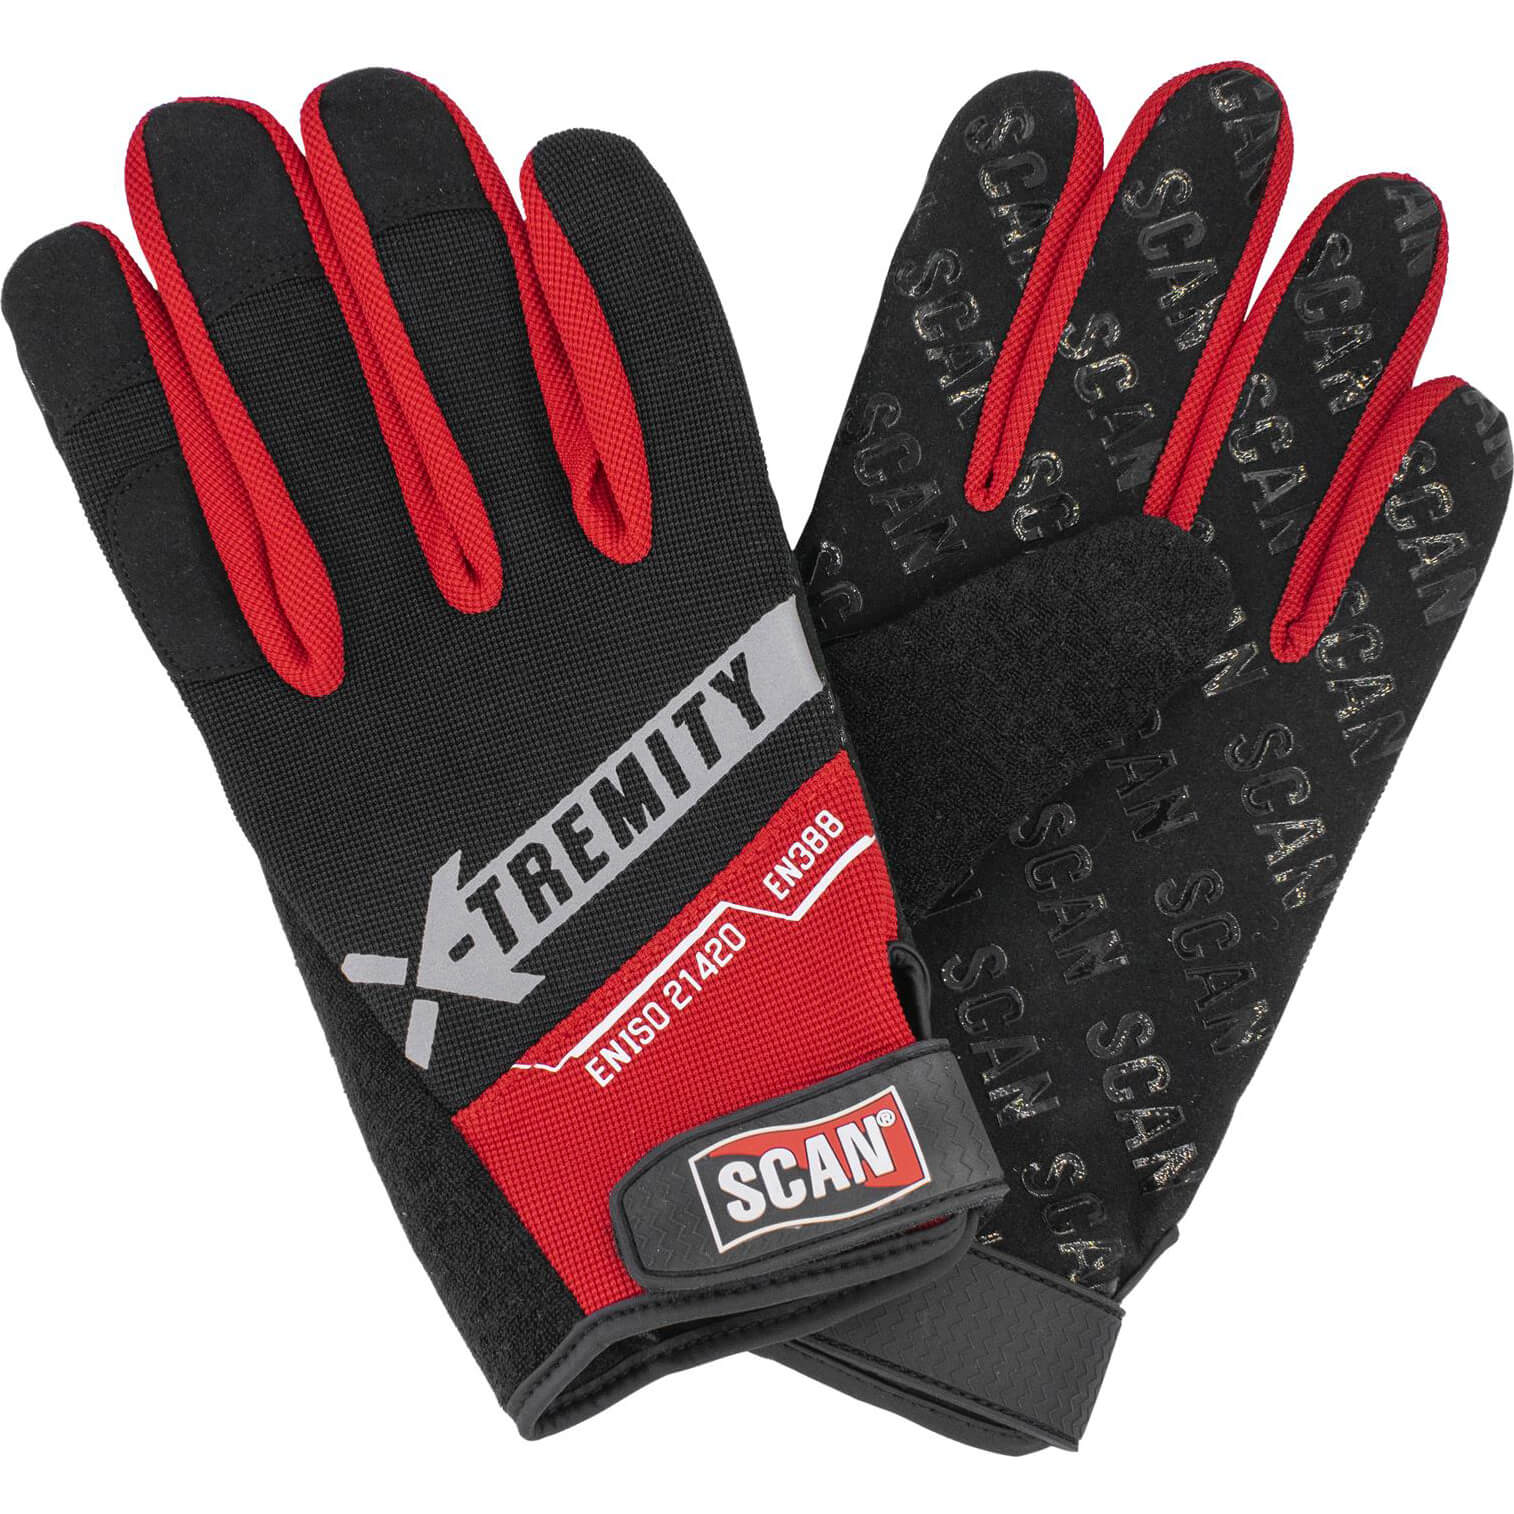 Image of Scan Touch Screen Work Gloves L